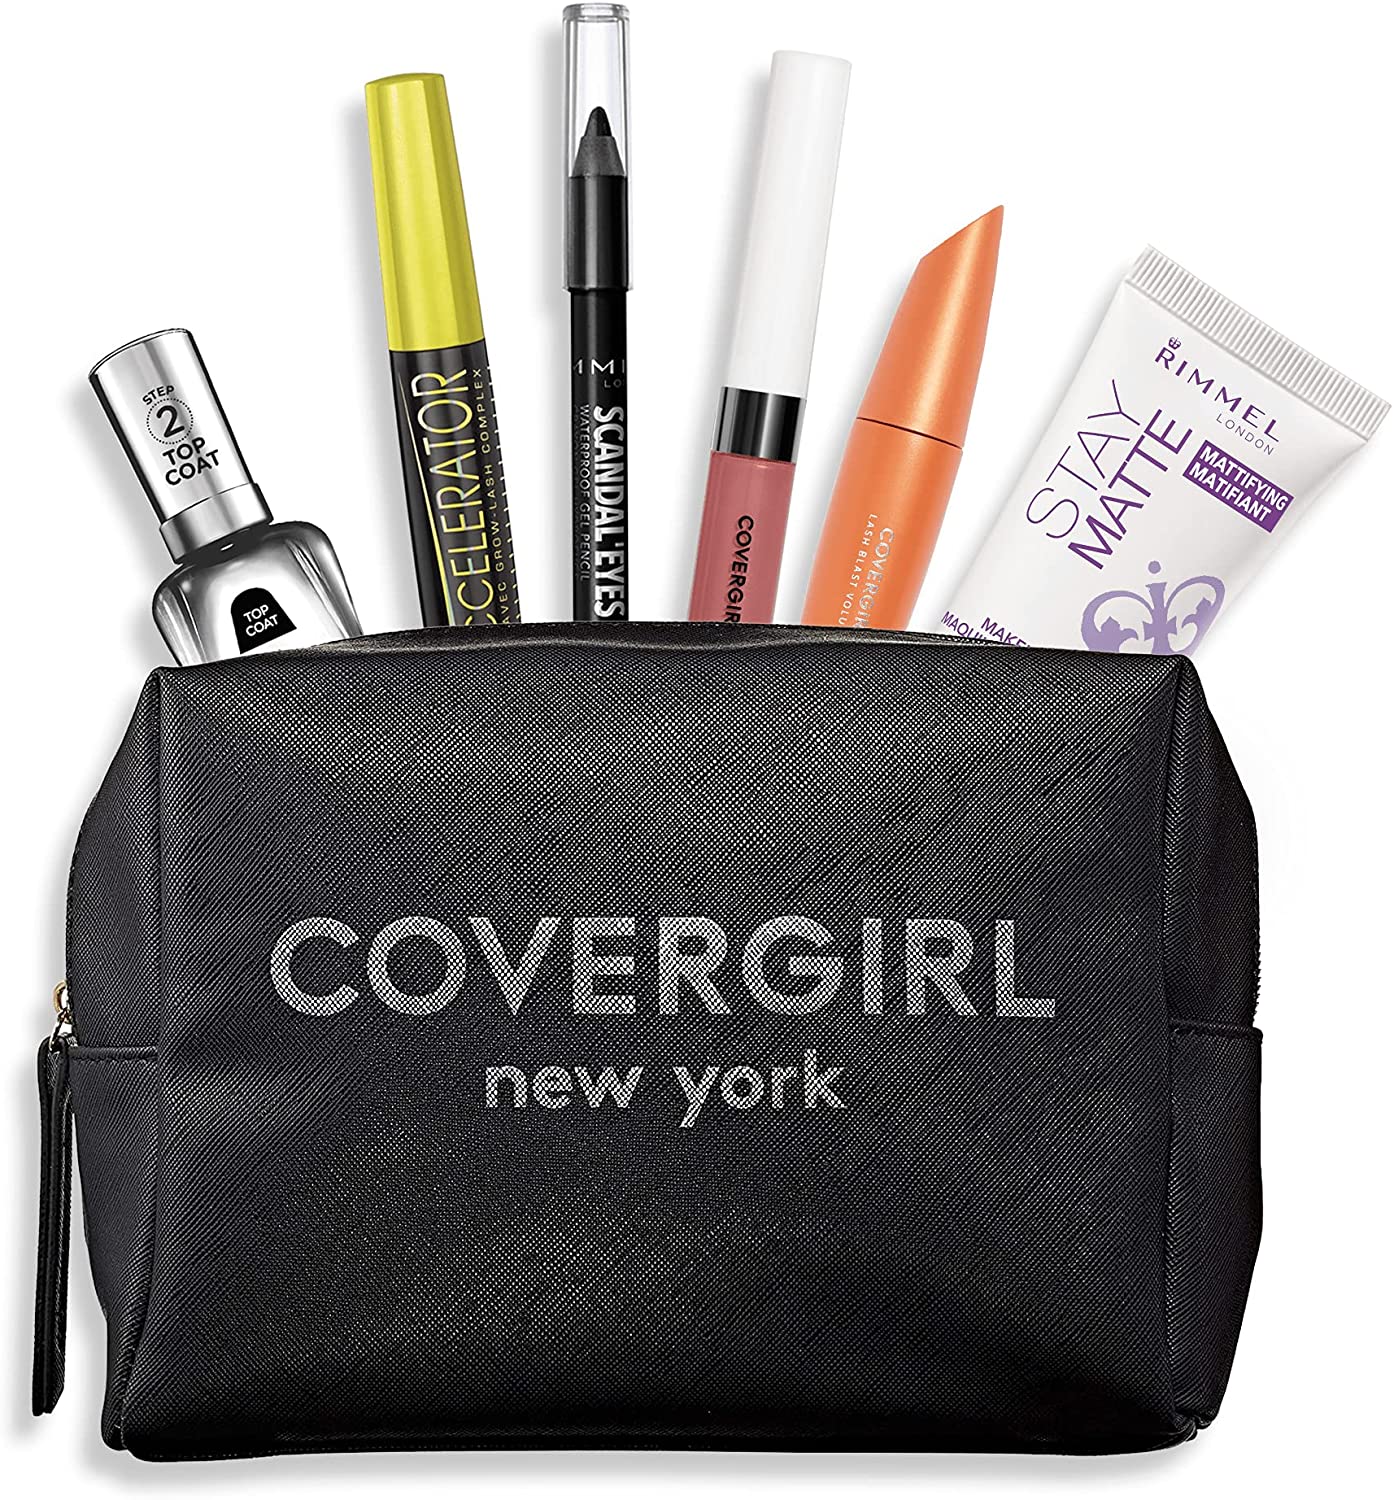 Covergirl Launches “Be Your Own Covergirl” Beauty Subscription Box